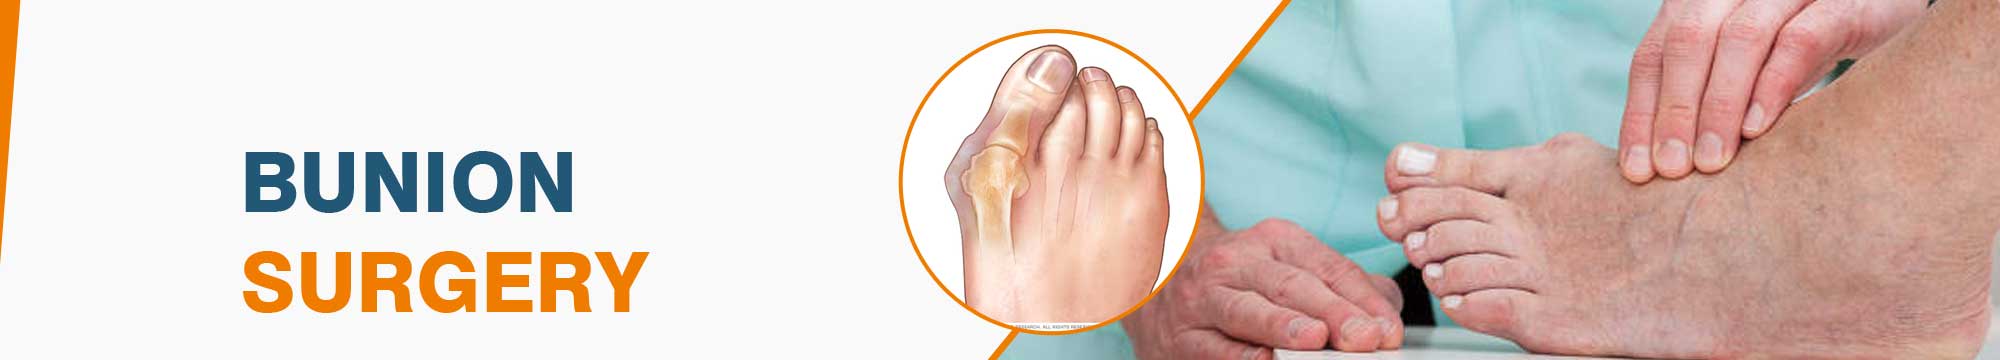 Bunion Surgery in India